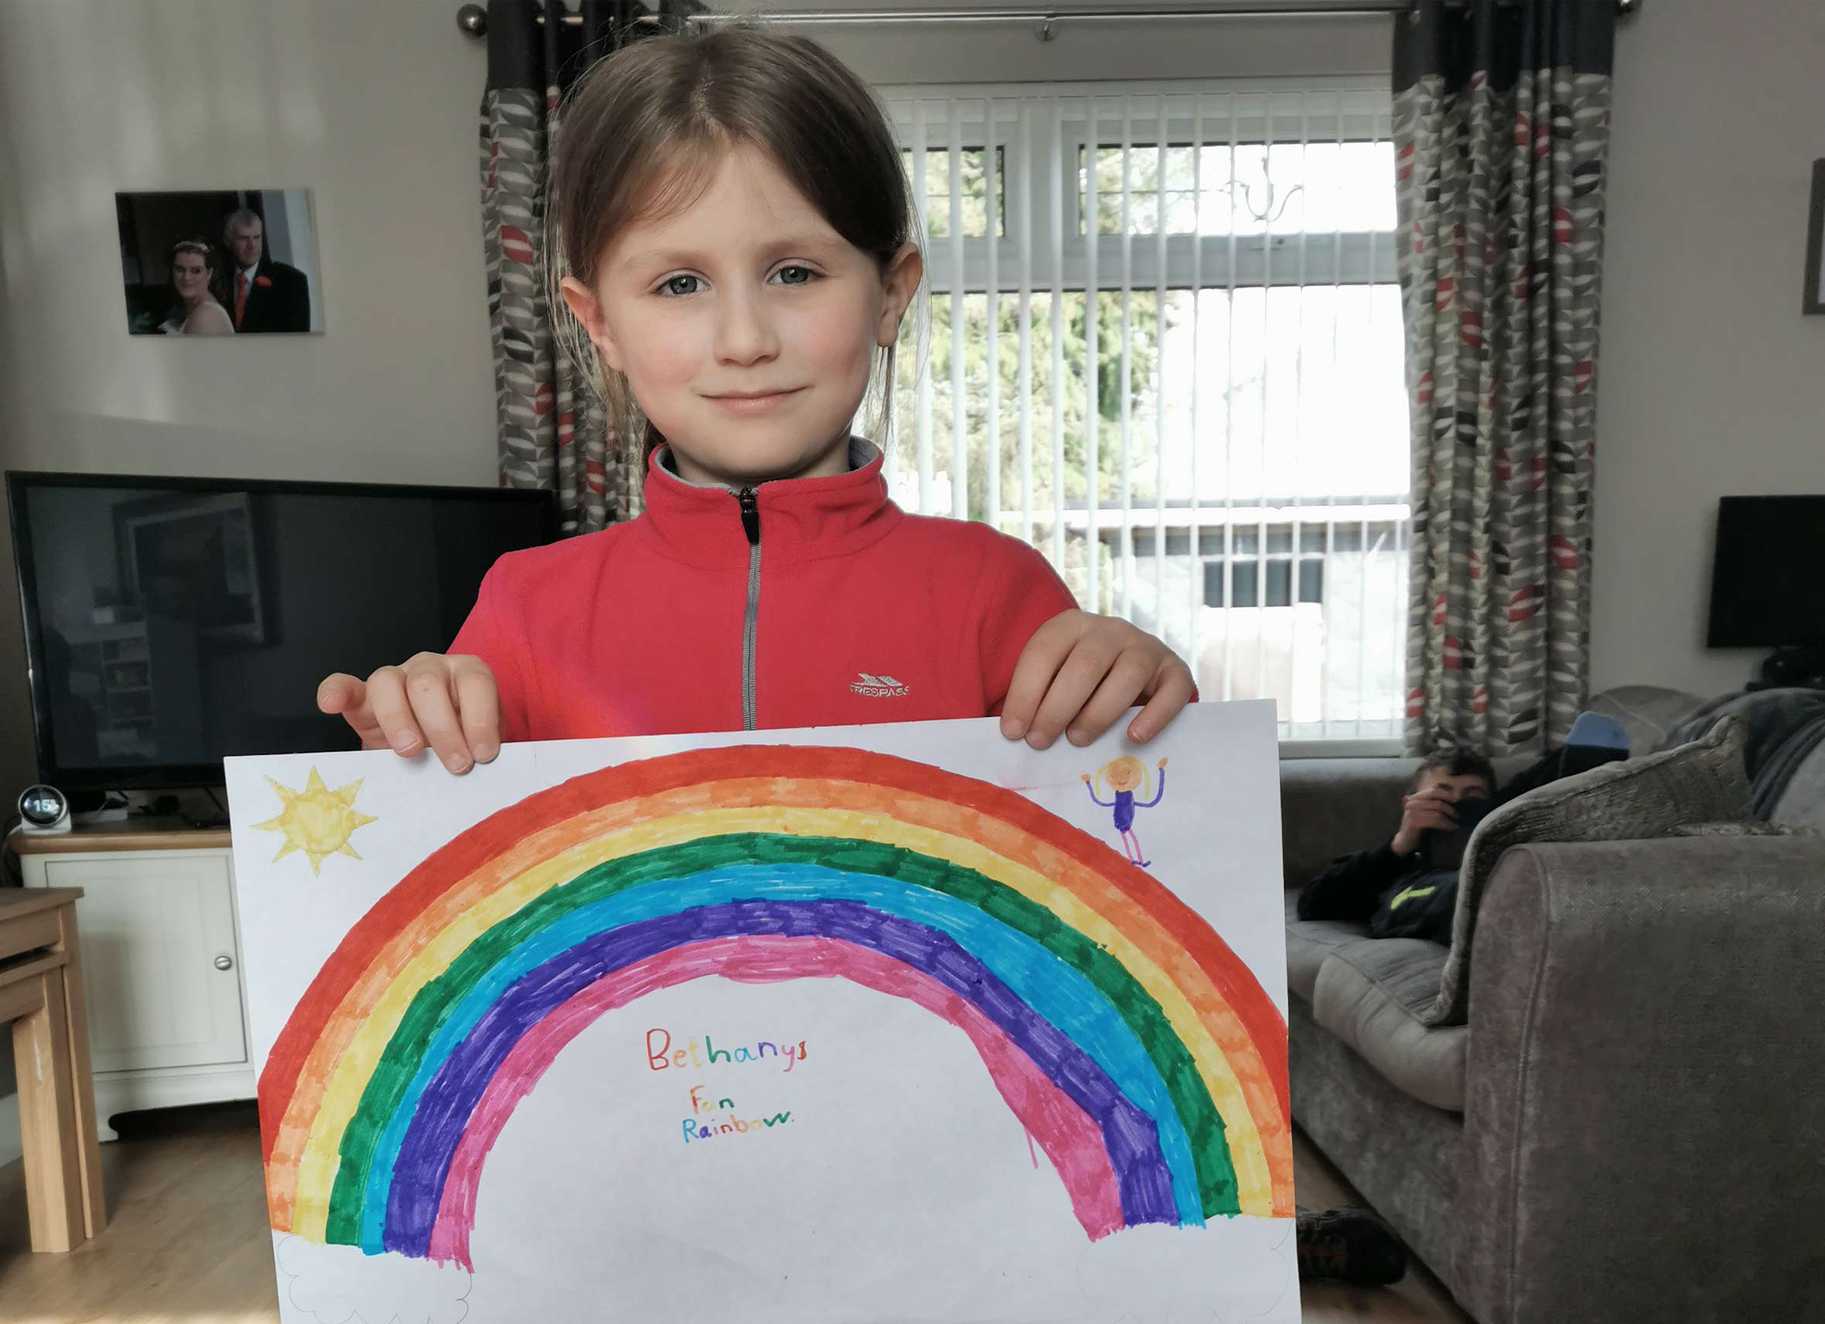 Bethany wearing holding a picture of a rainbow she painted.